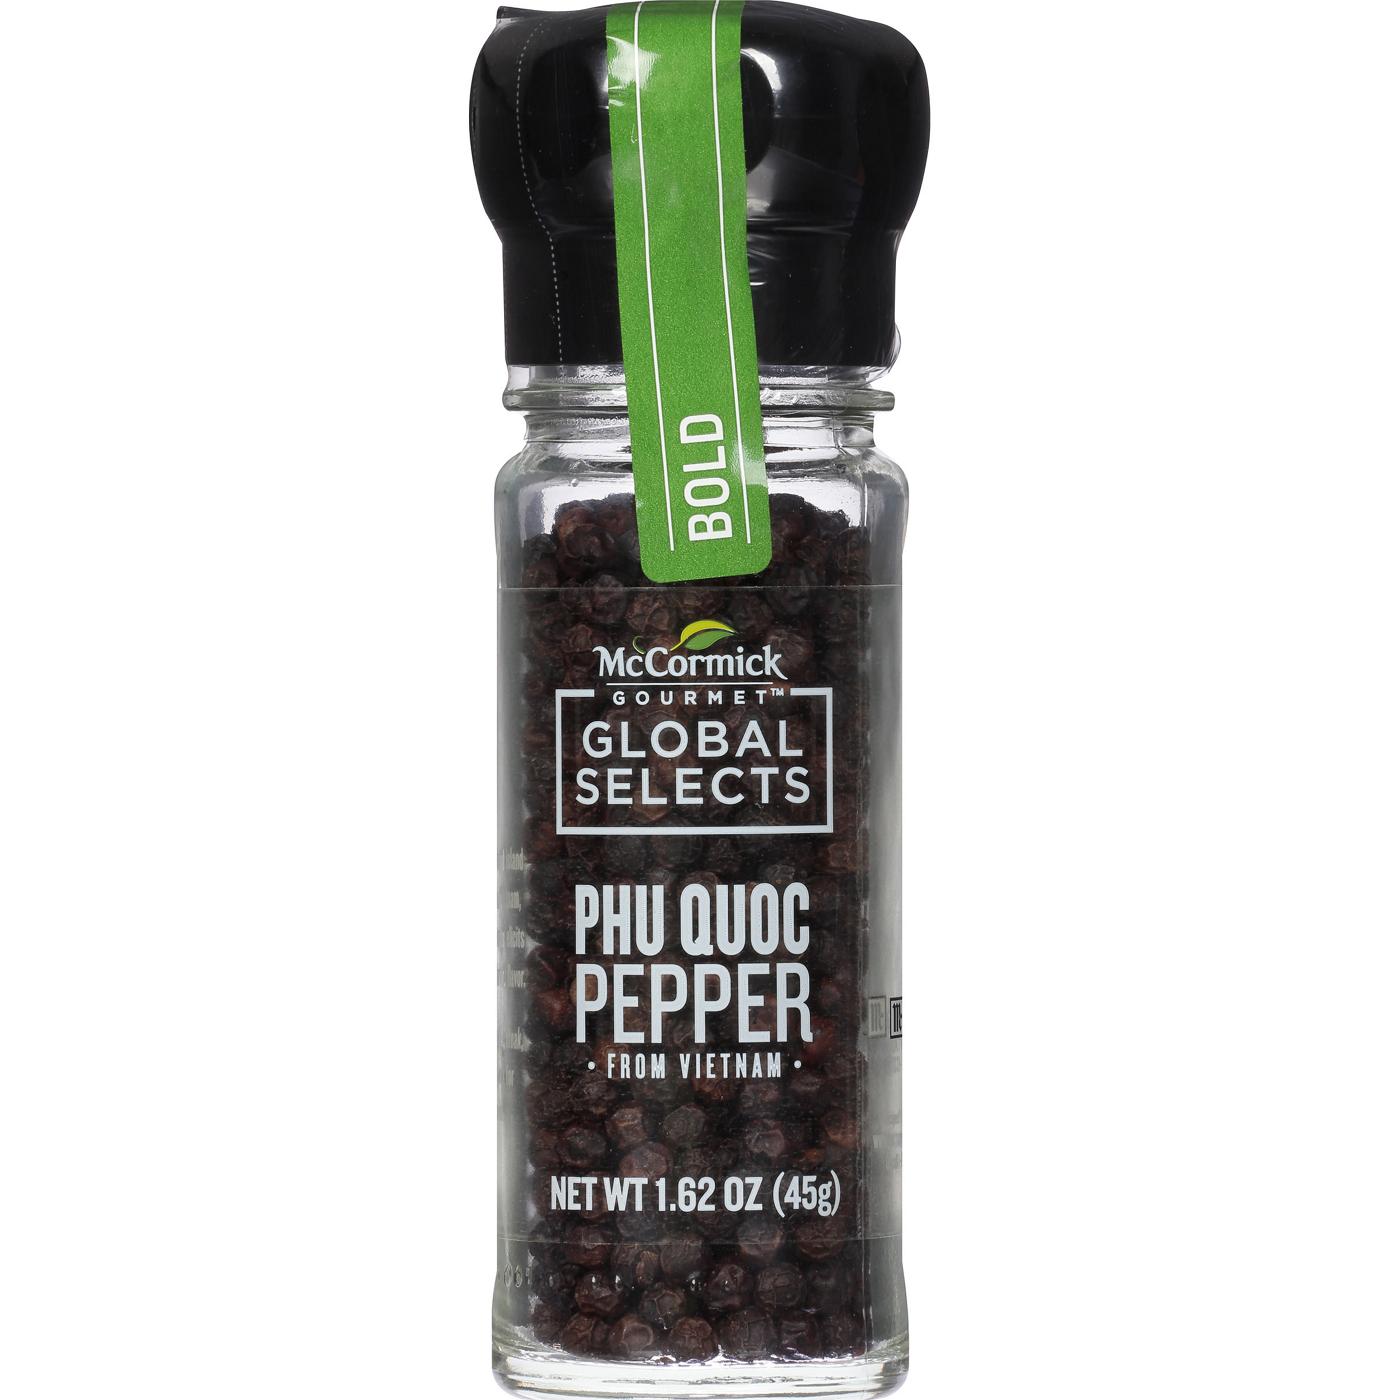 McCormick Gourmet Global Selects Phu Quoc Pepper from Vietnam; image 1 of 2